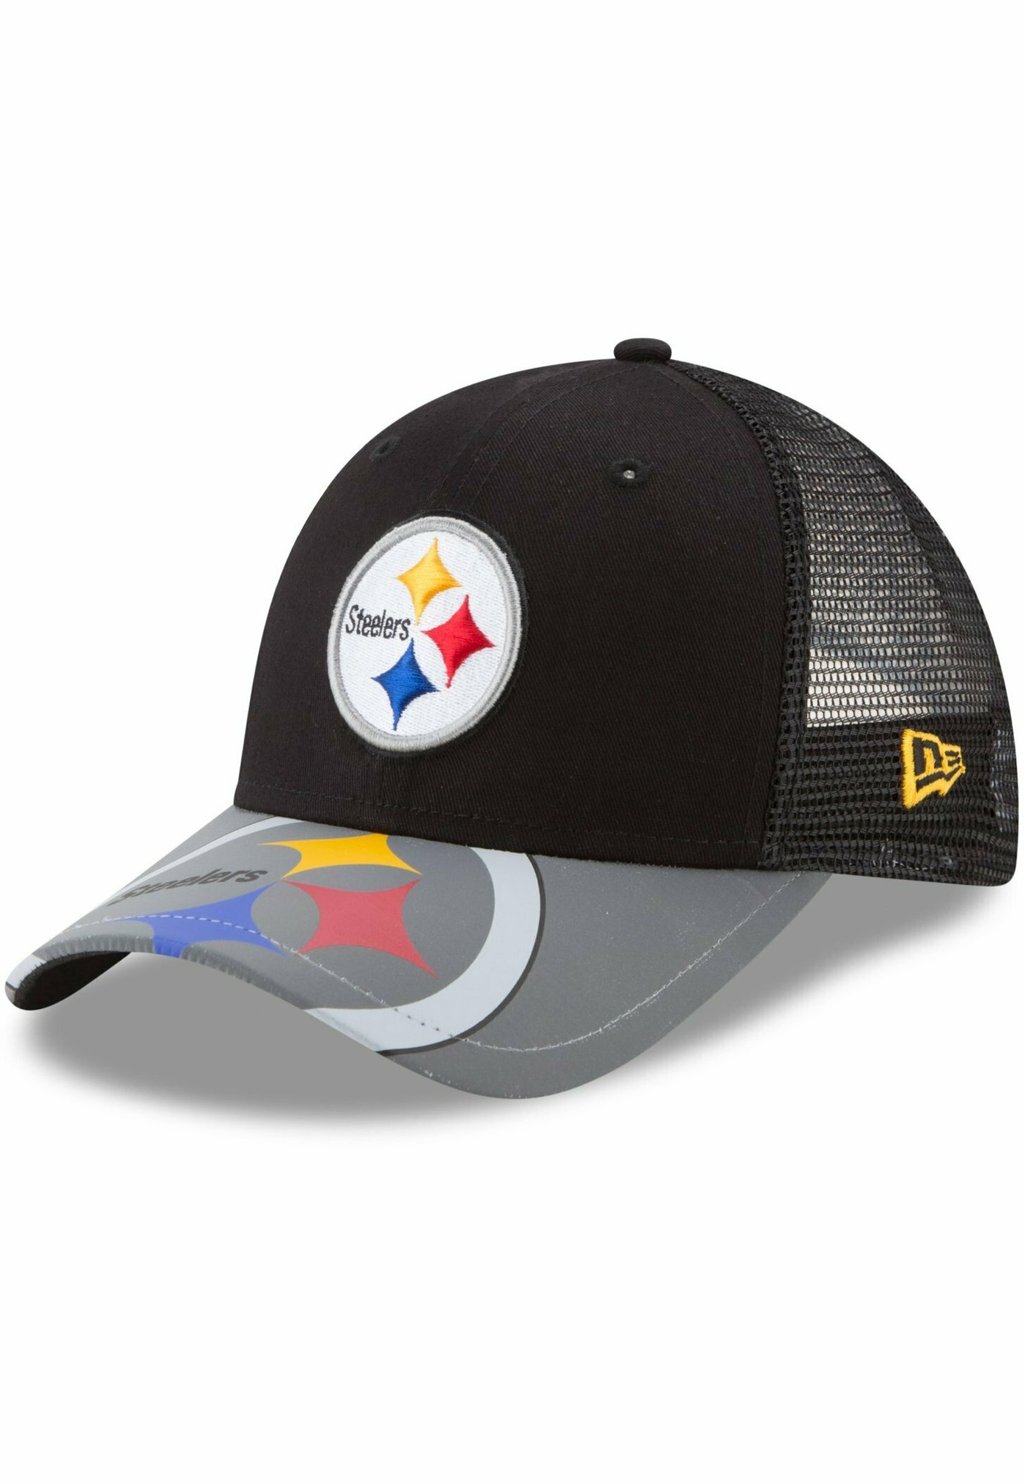 Бейсболка TRUCKER 9FORTY REFLECT VISOR NFL TEAMS New Era, цвет pittsburgh steelers new steelers women s fans rugby jerseys sports fans wear james conner american football pittsburgh jersey stitched t shirts